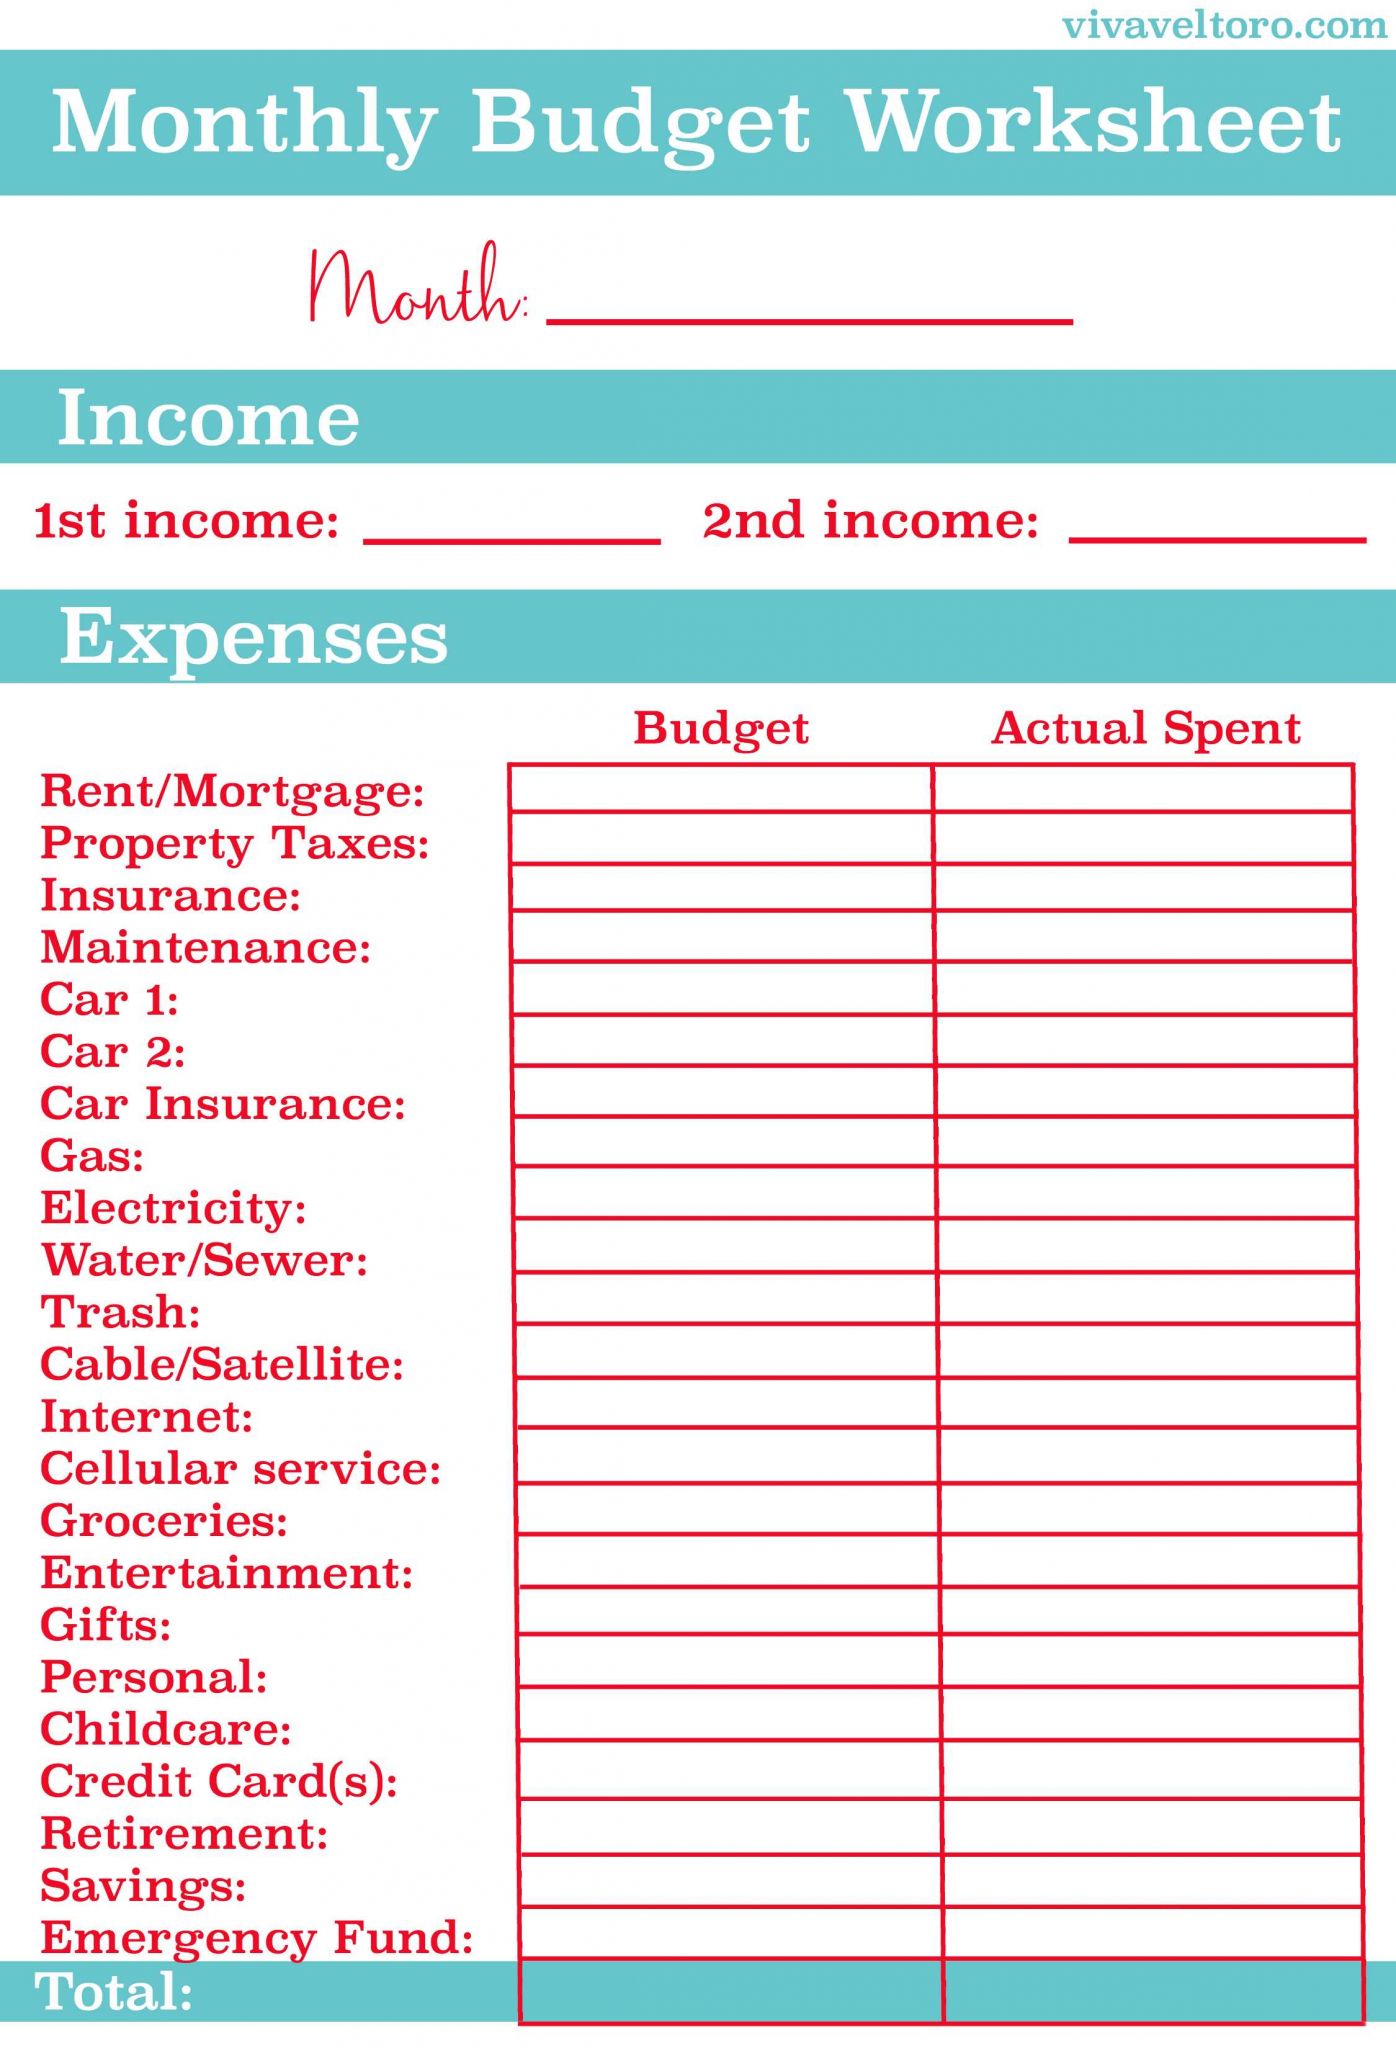 Home Budget Worksheet Pdf and Use This Monthly Bud Worksheet to Take Control Of Your Personal